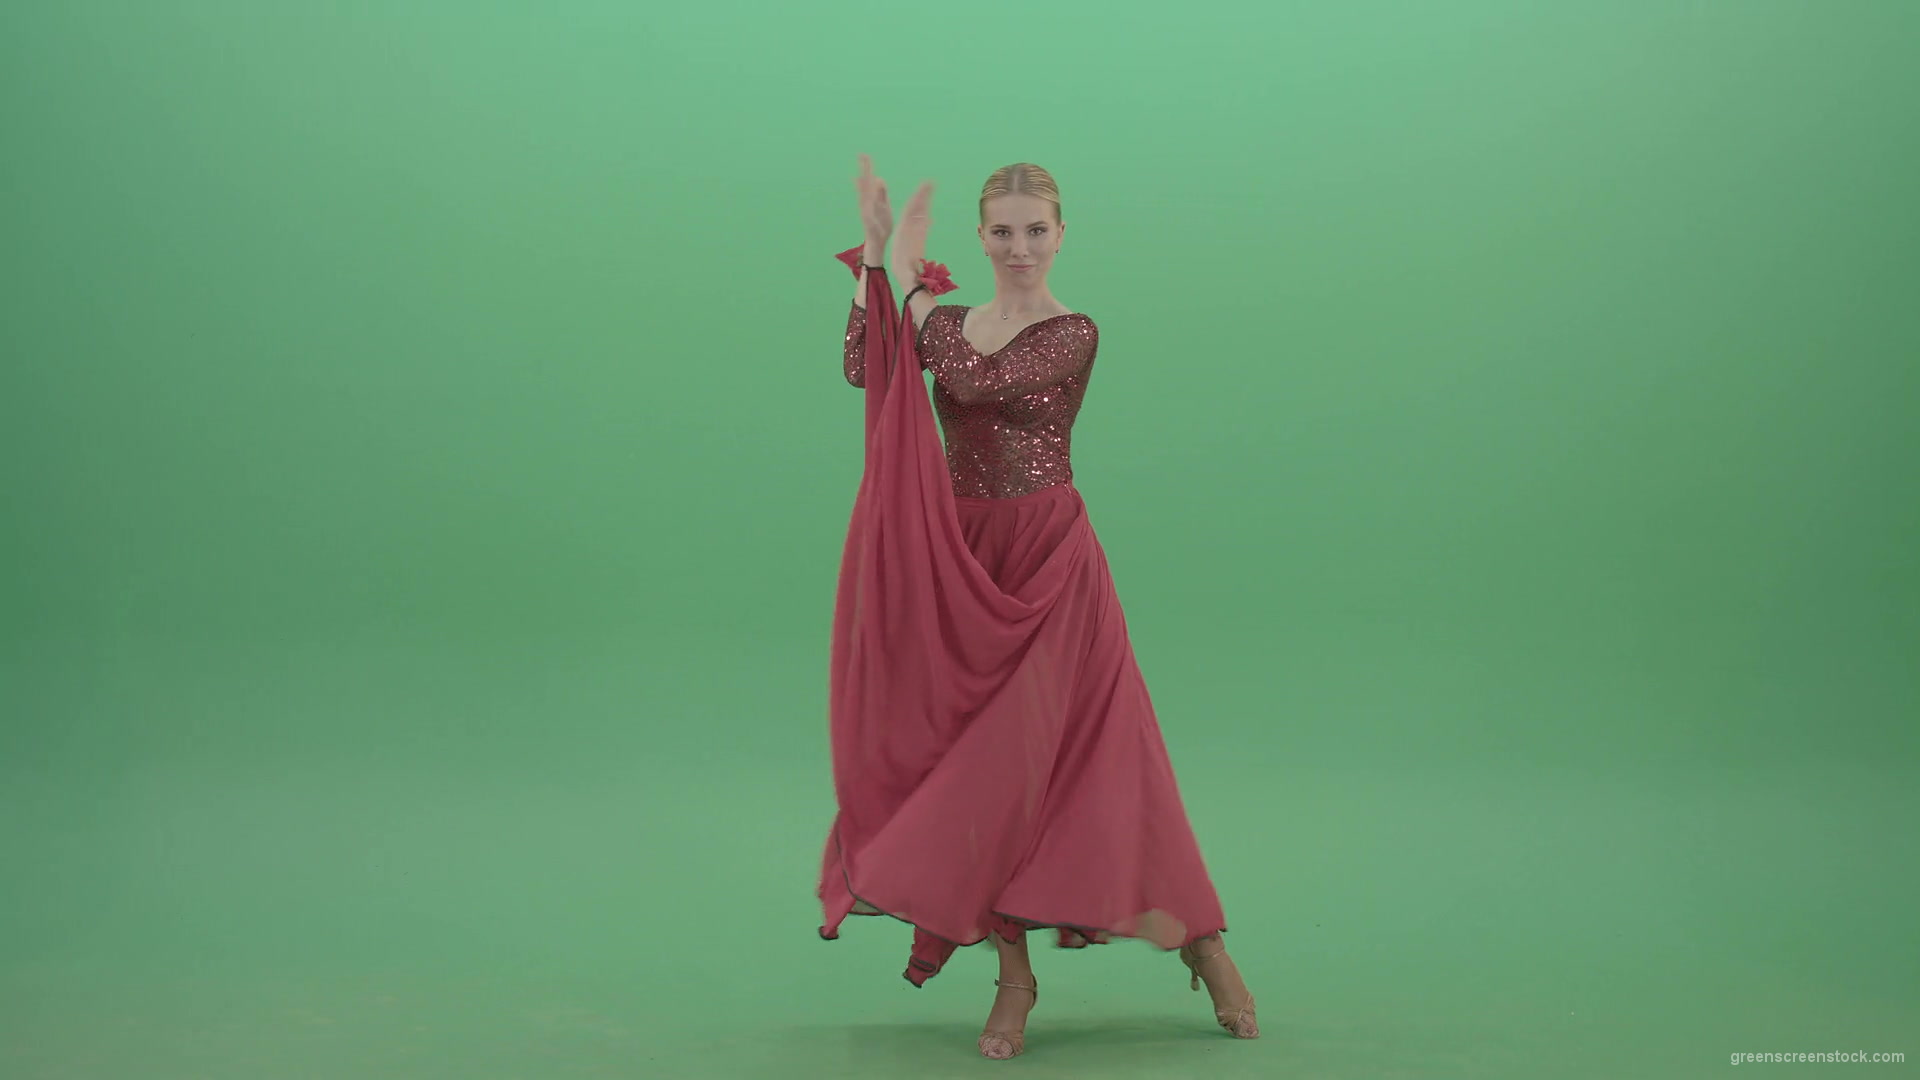 Elegant-woman-in-red-ballroom-dress-spinning-and-clapping-in-hands-isolated-on-green-screen-4K-Video-Footage-1920_005 Green Screen Stock